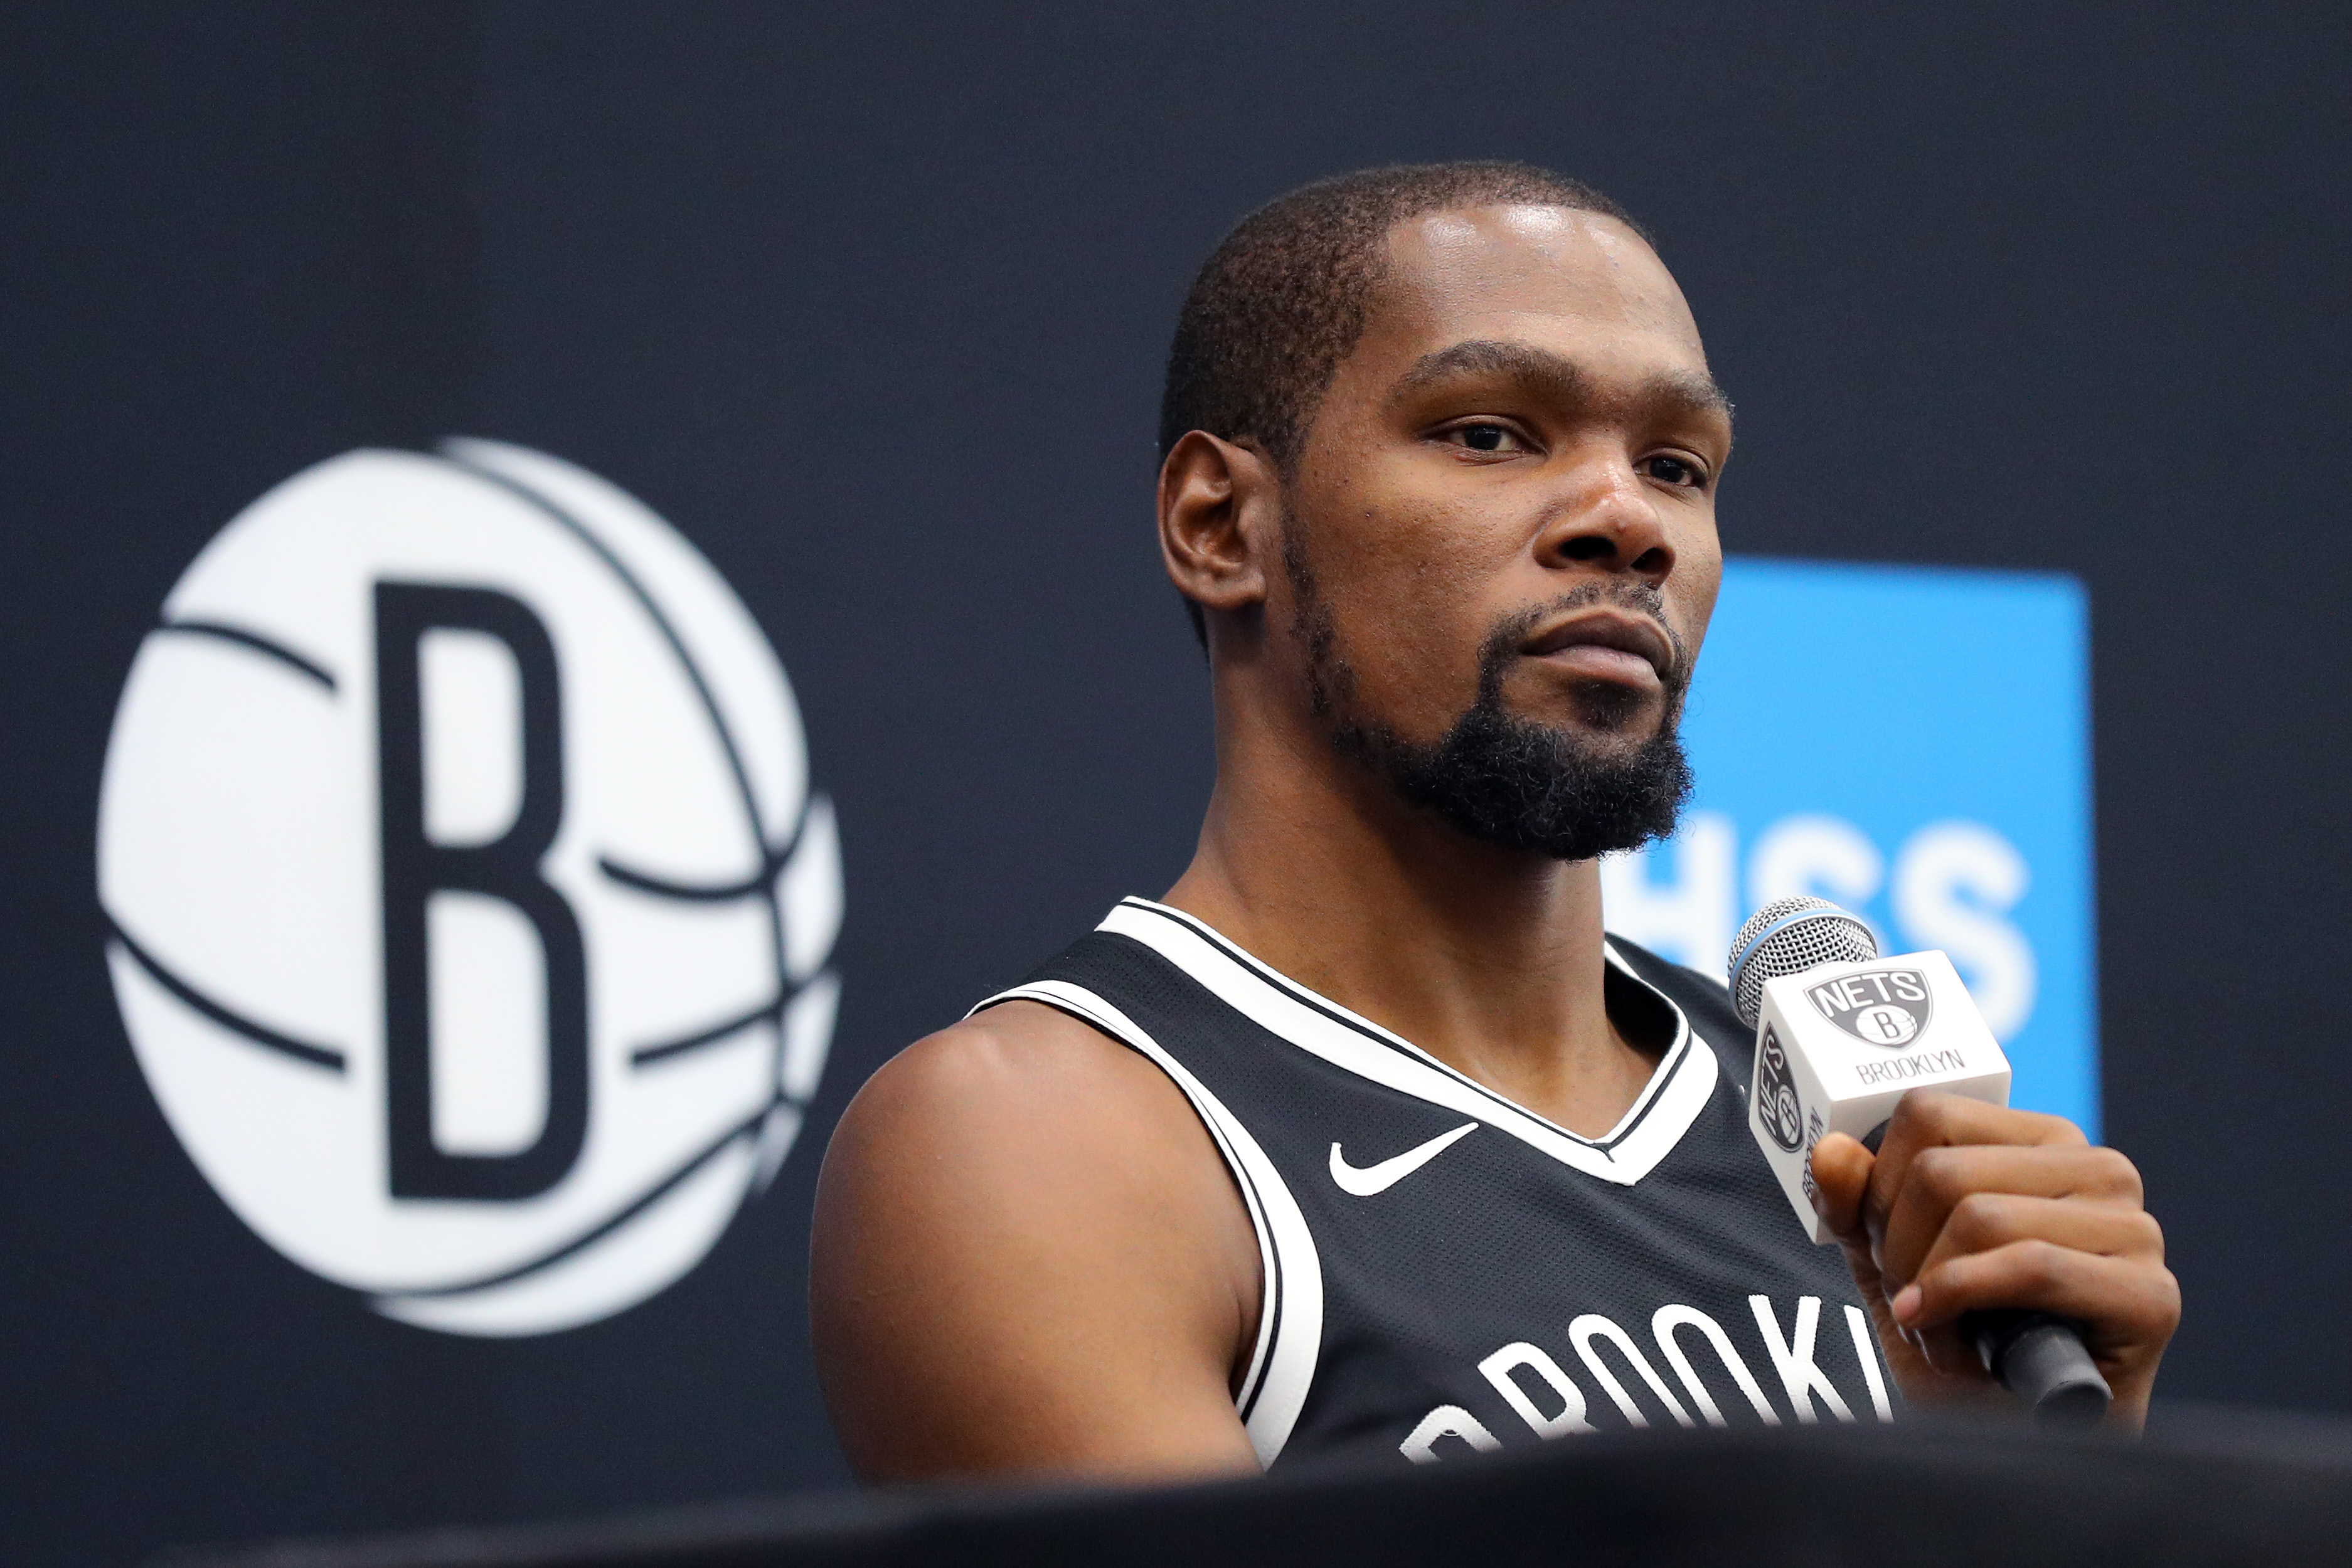 In latest Twitter confrontation, Kevin Durant claps back at